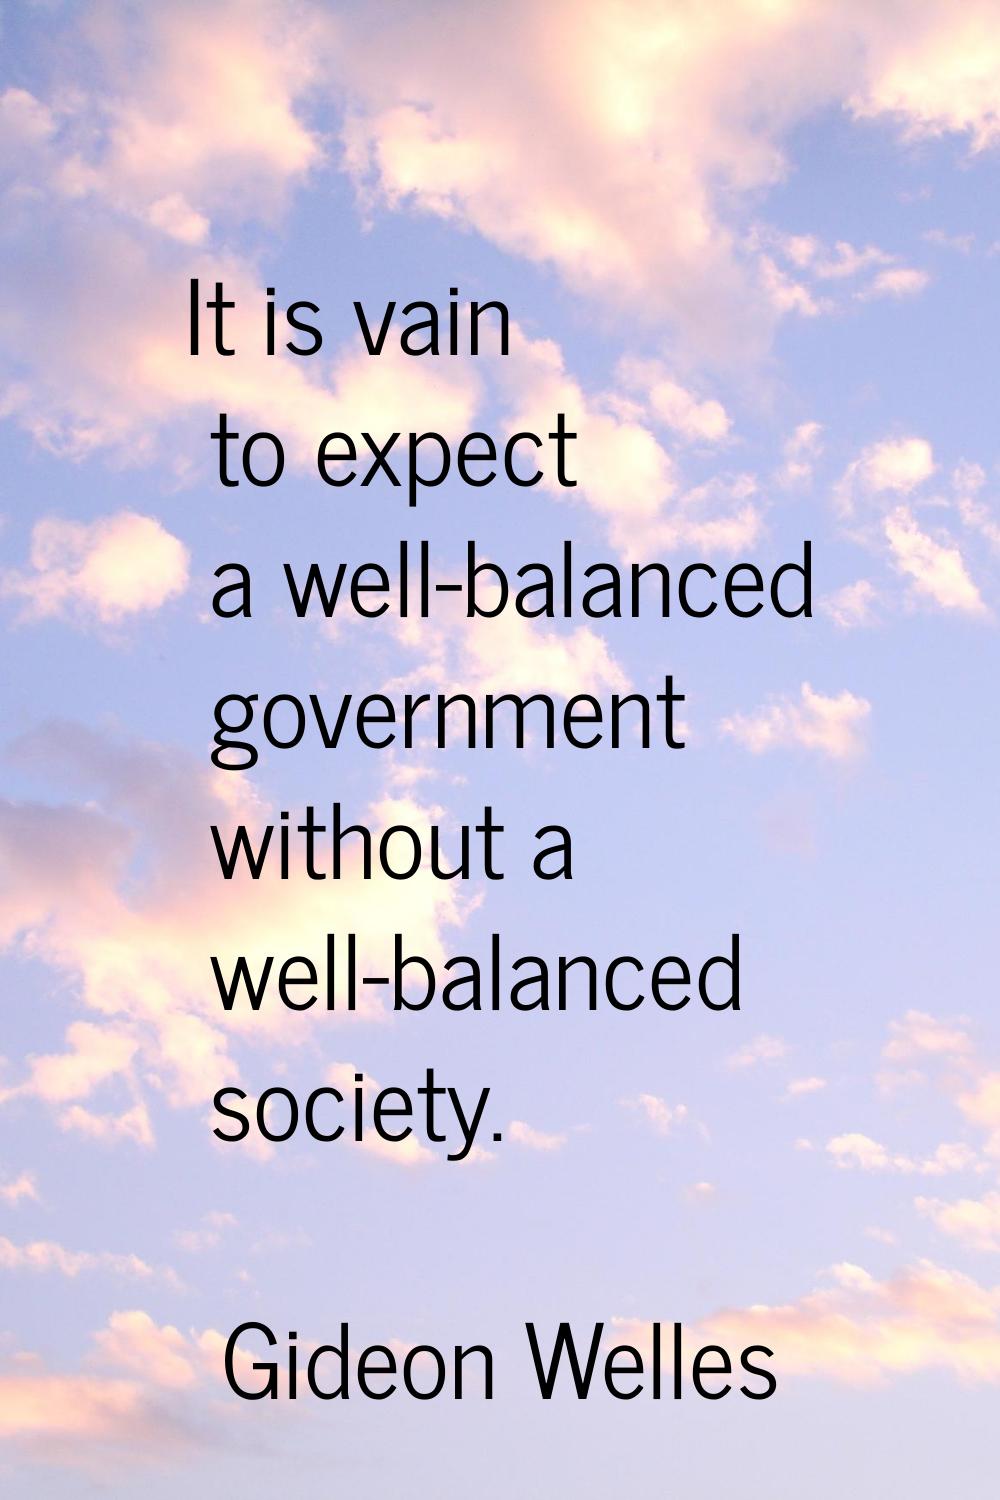 It is vain to expect a well-balanced government without a well-balanced society.